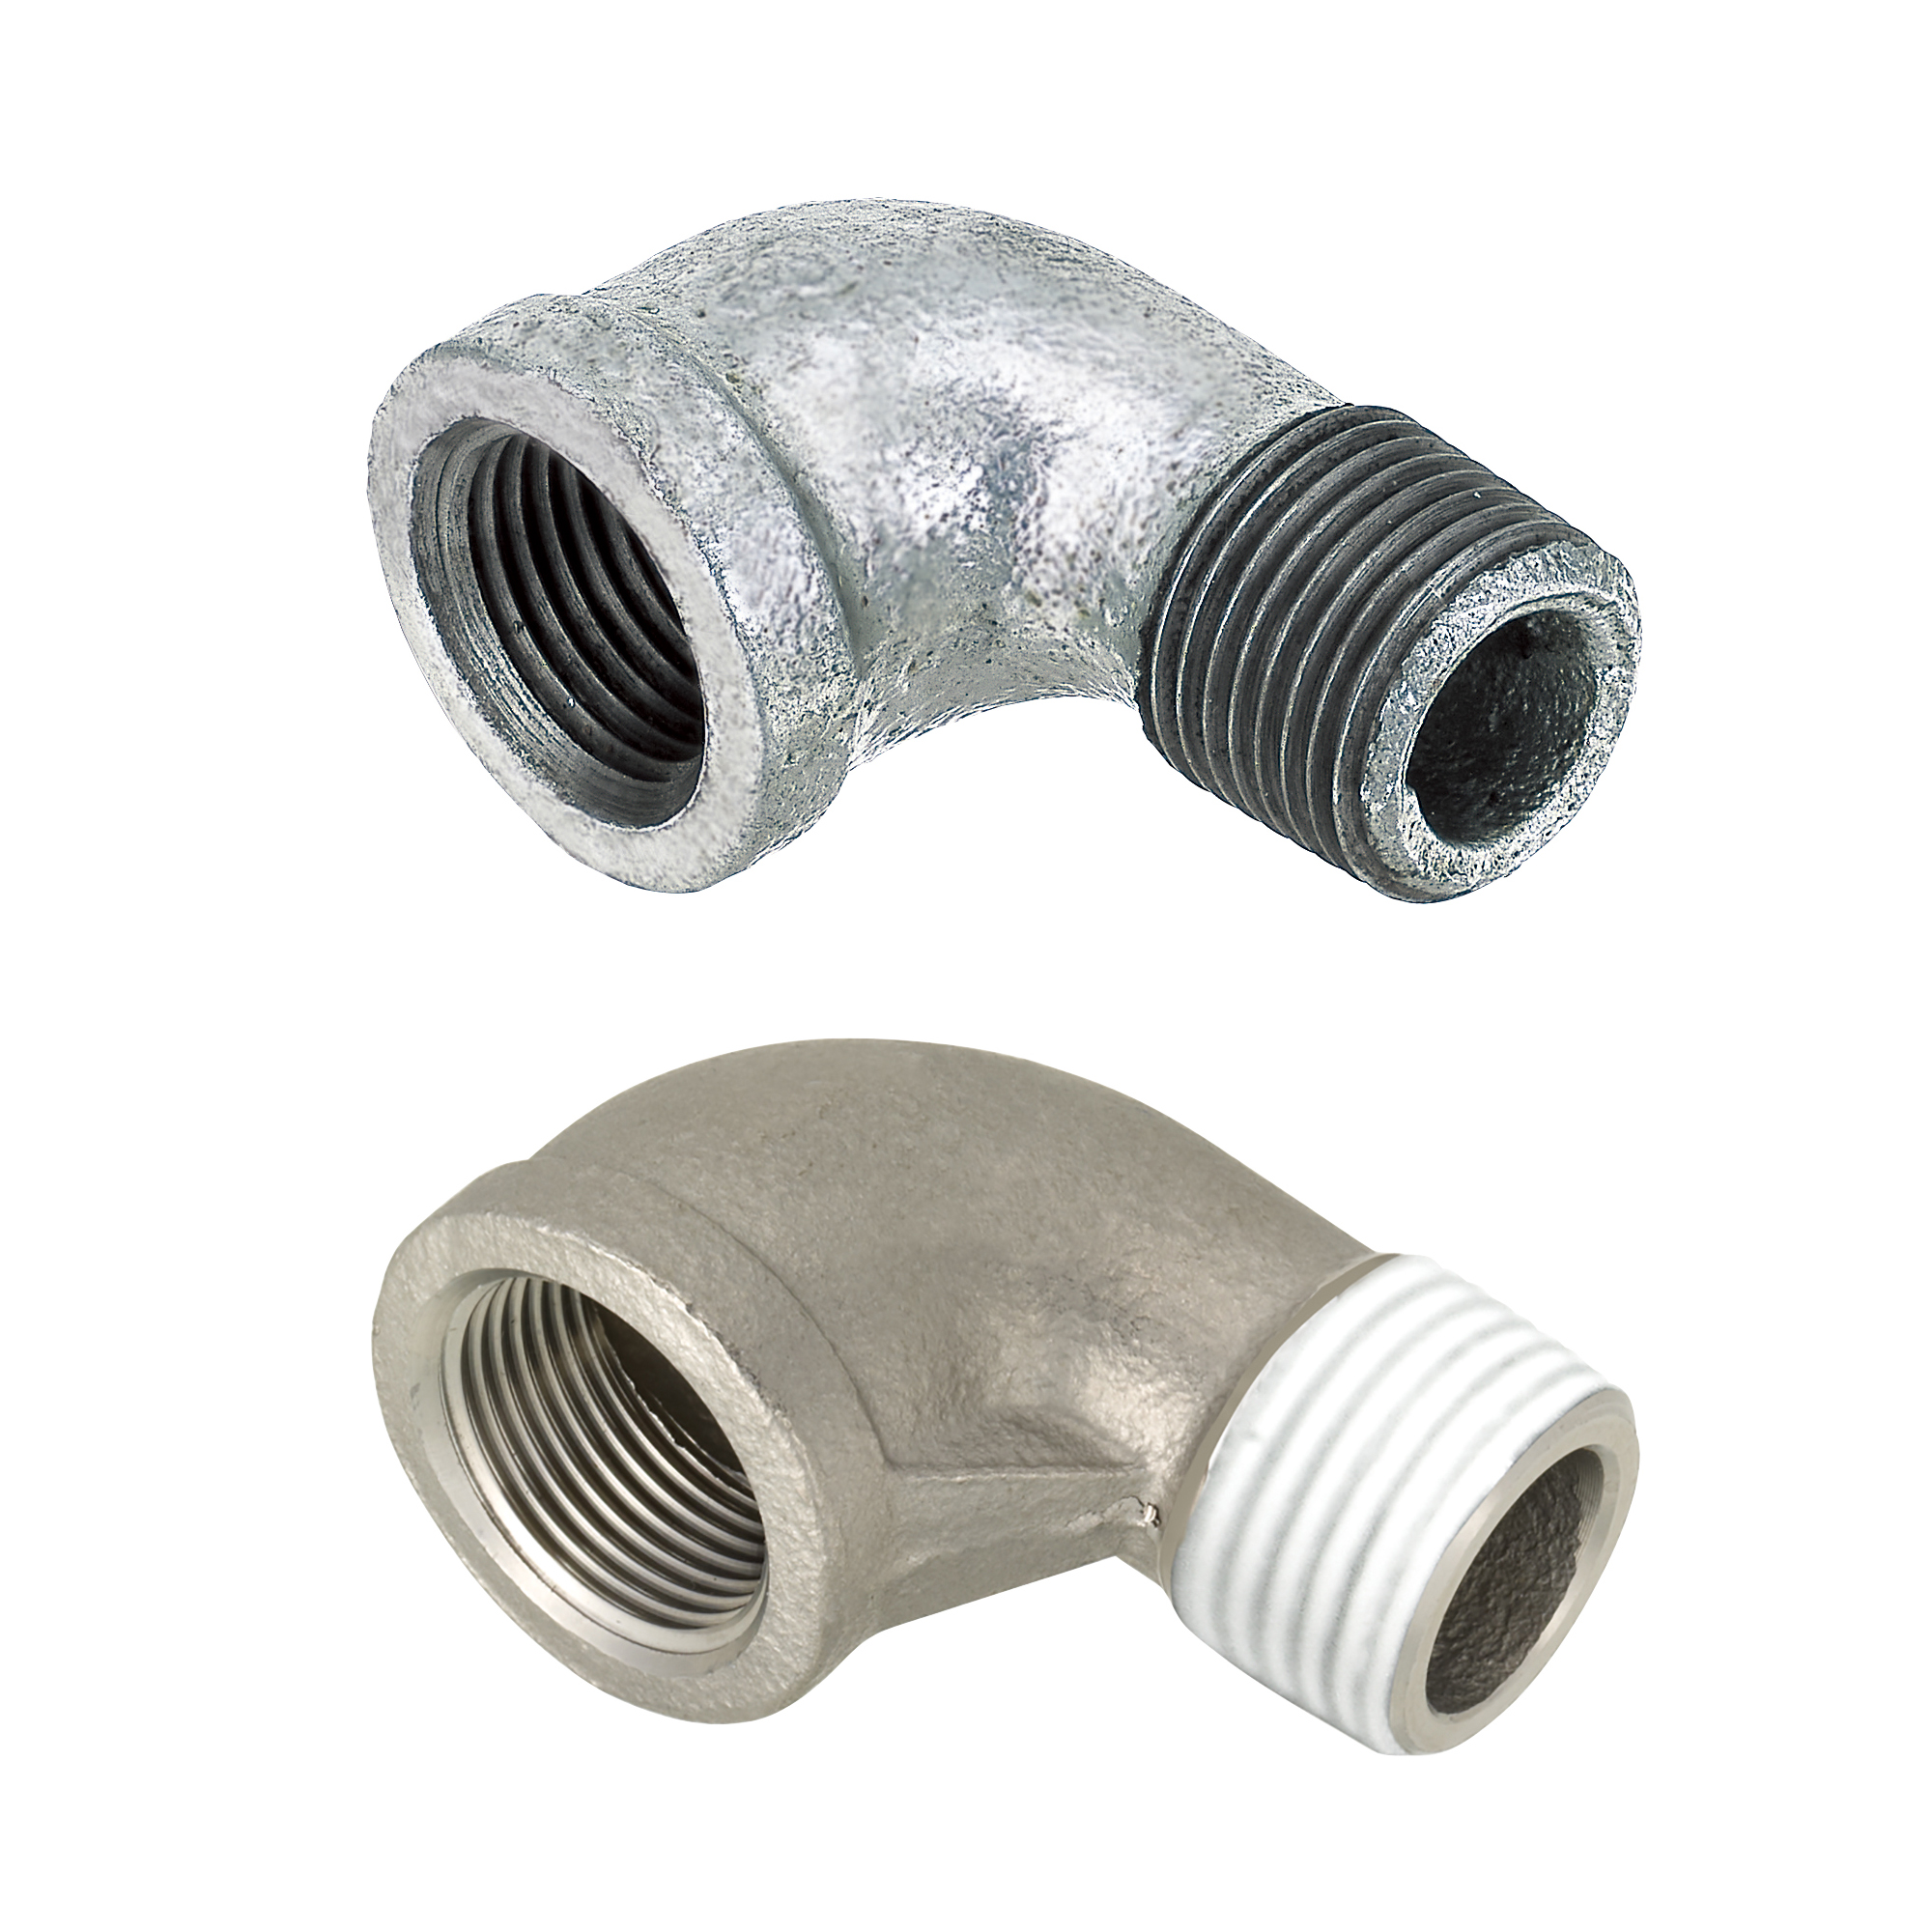 Low Pressure Fittings/90 Deg. Elbow/Threaded and Tapped (SGCEL20A) 